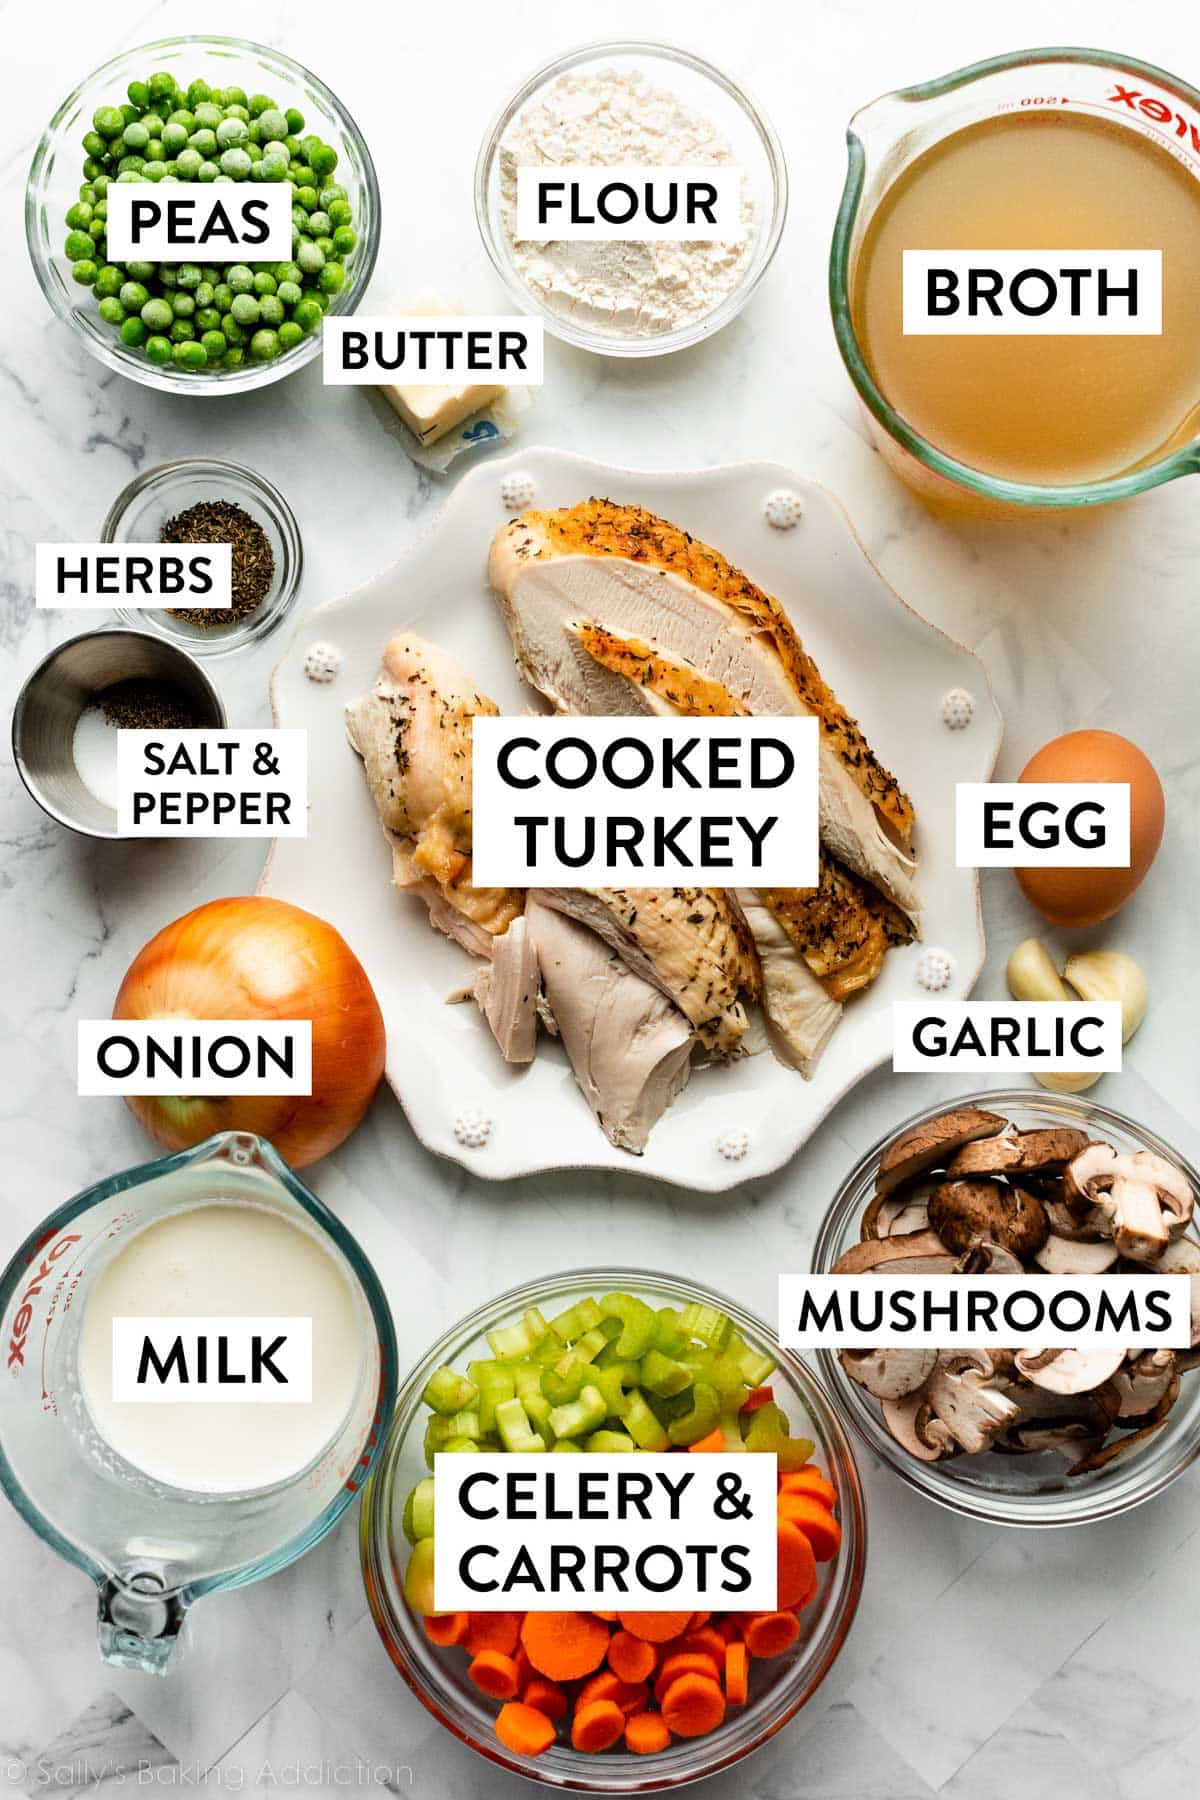 ingredients on marble counter including broth, cooked turkey, peas, mushrooms, milk, garlic cloves, and onion.